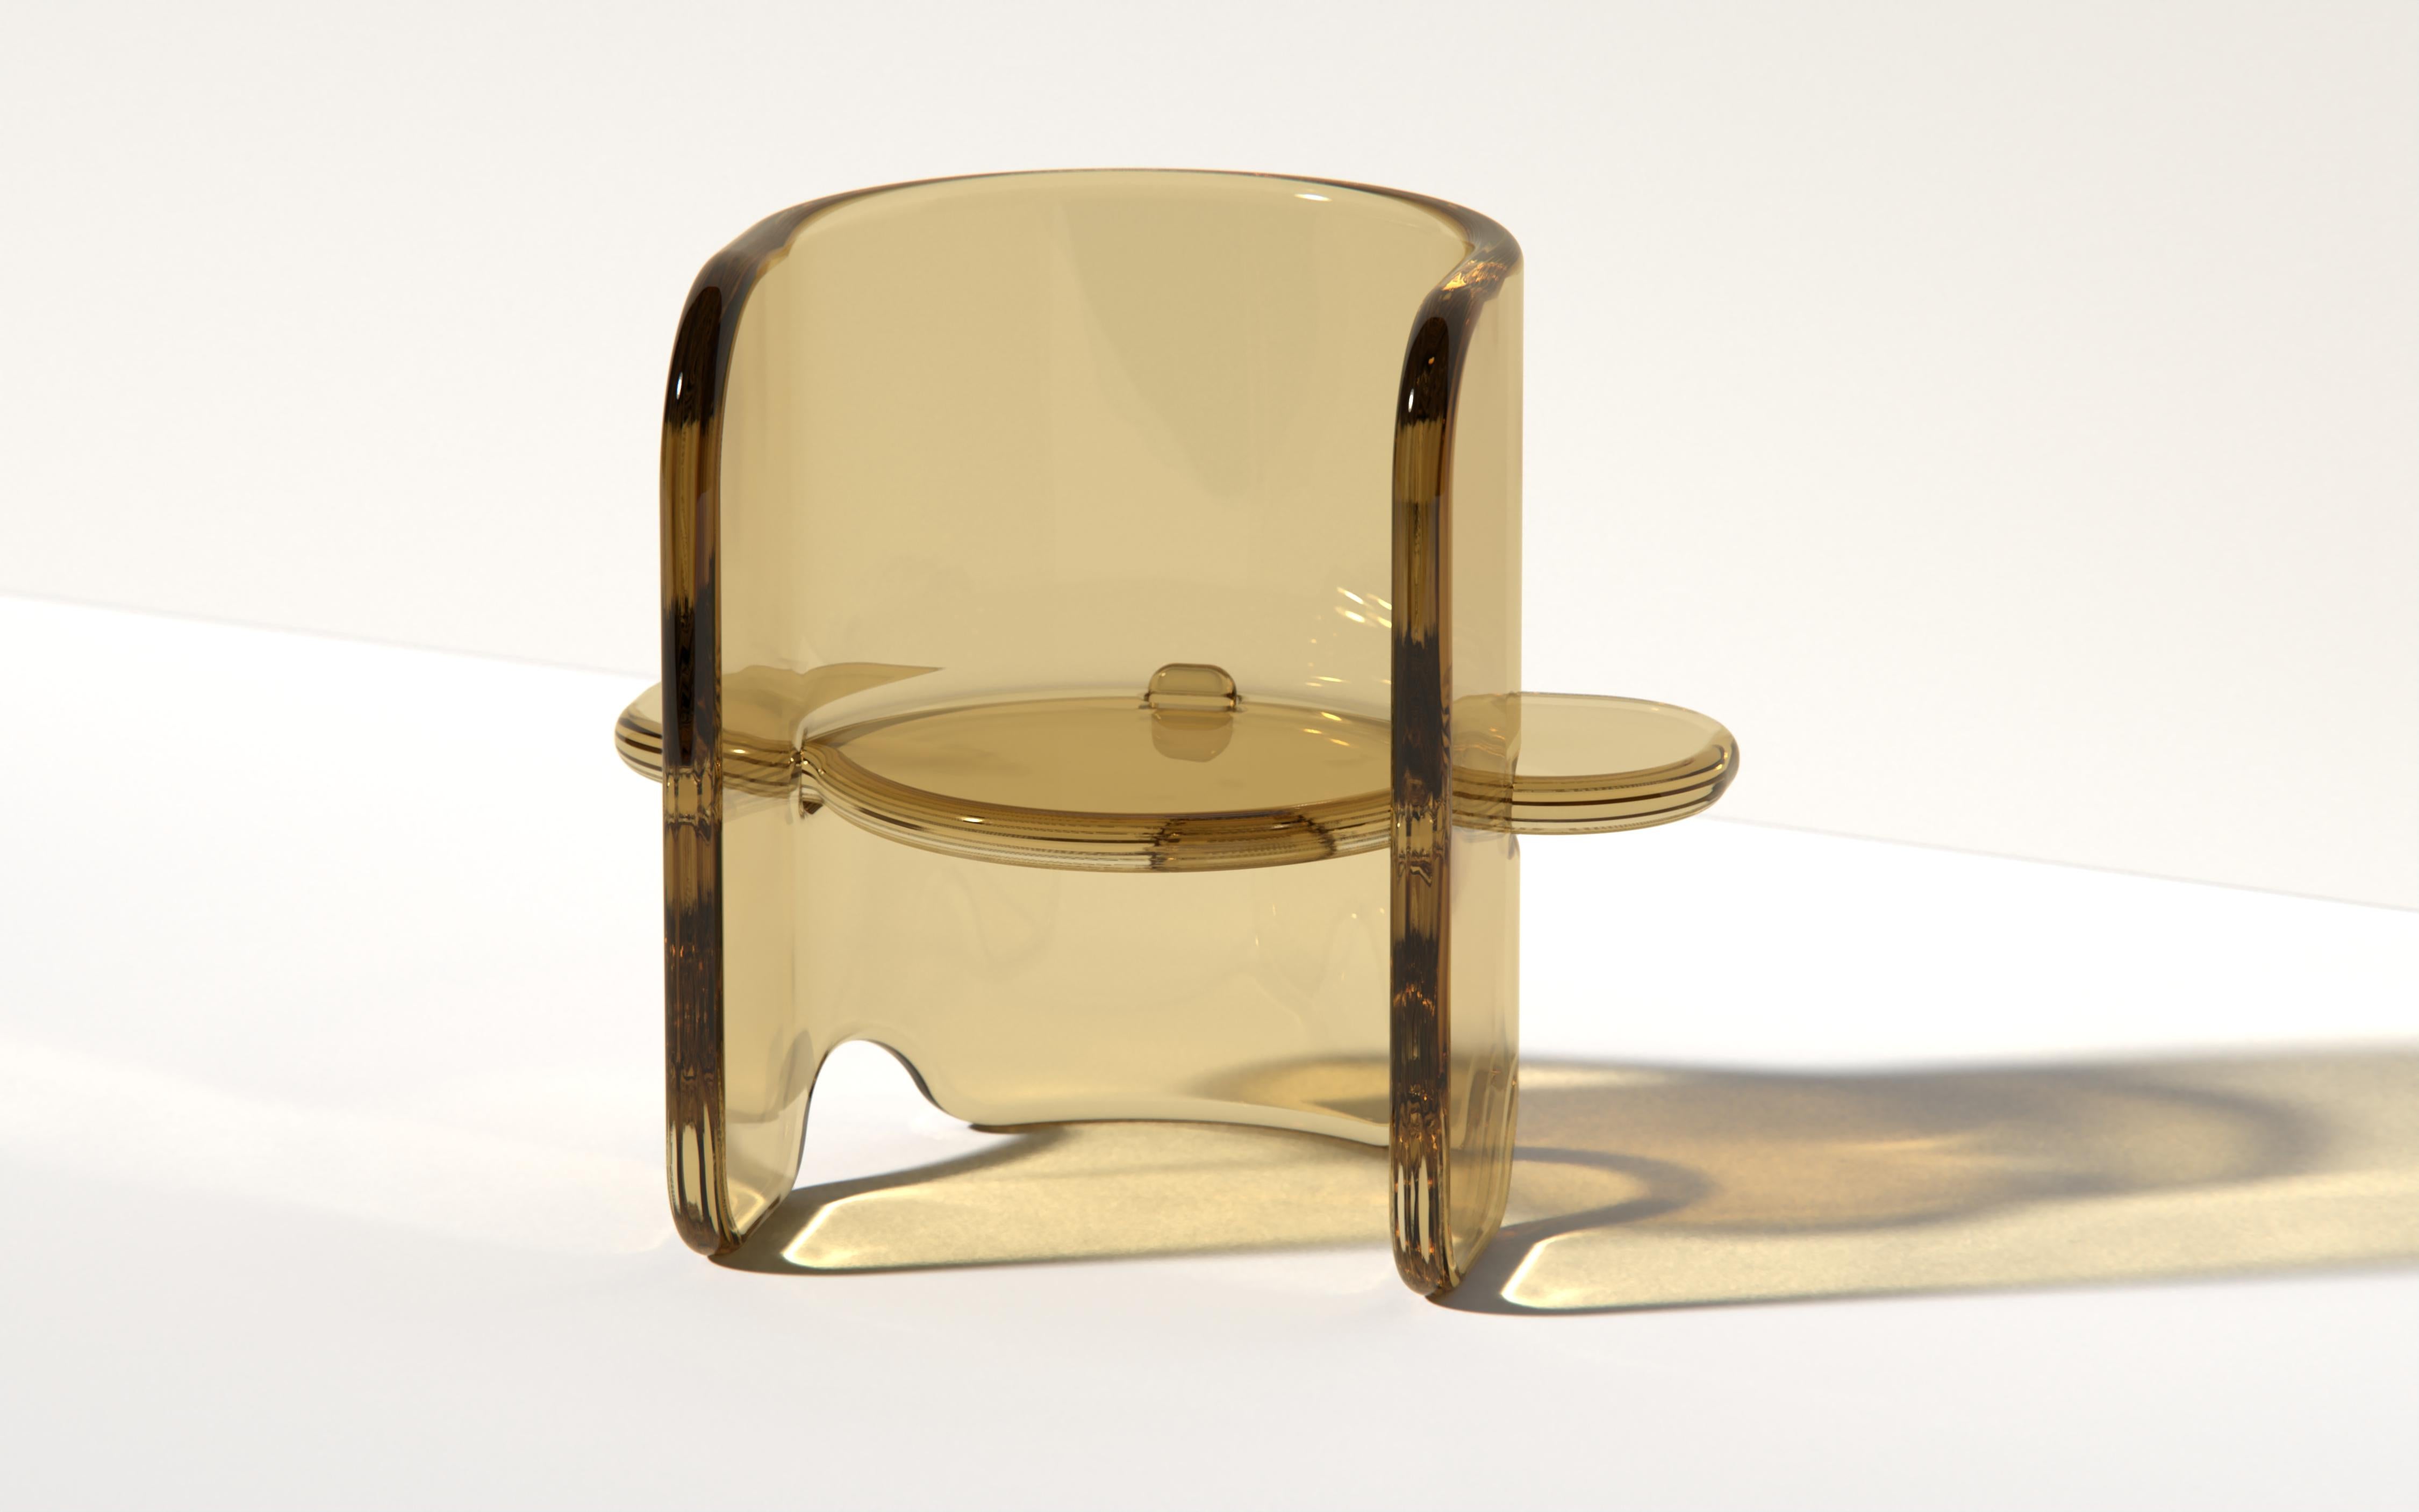 Modern Plump Chair by Ian Cochran, Represented by Tuleste Factory For Sale